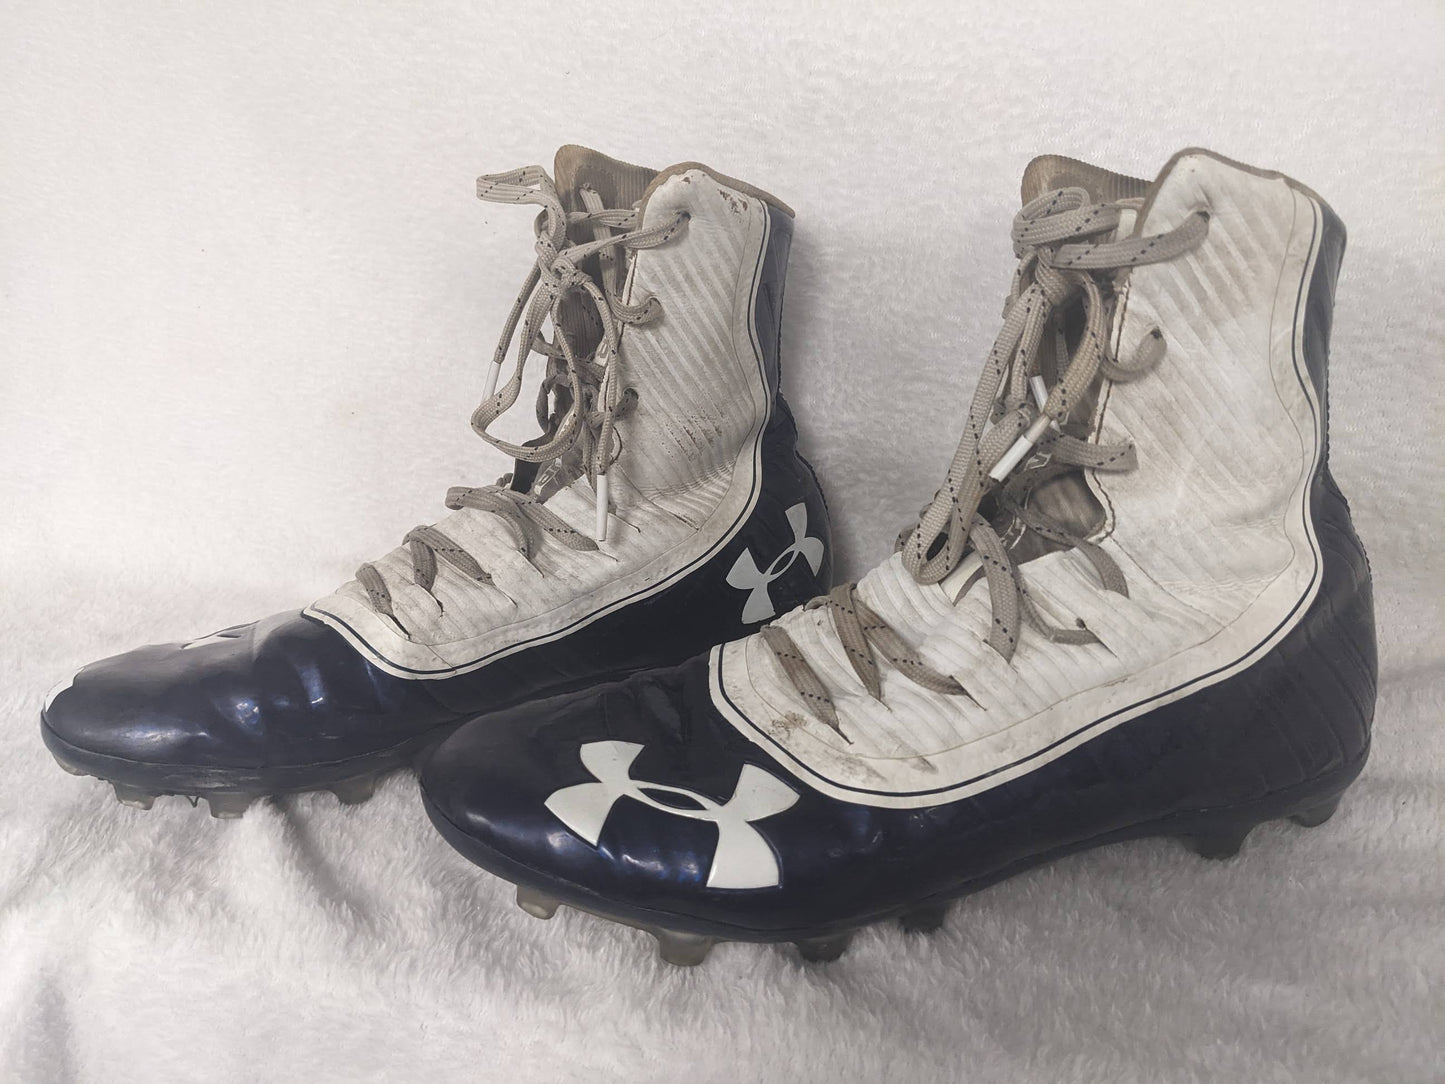 Under Armour Hightlight Cleats Size 8 Color White Condition Used